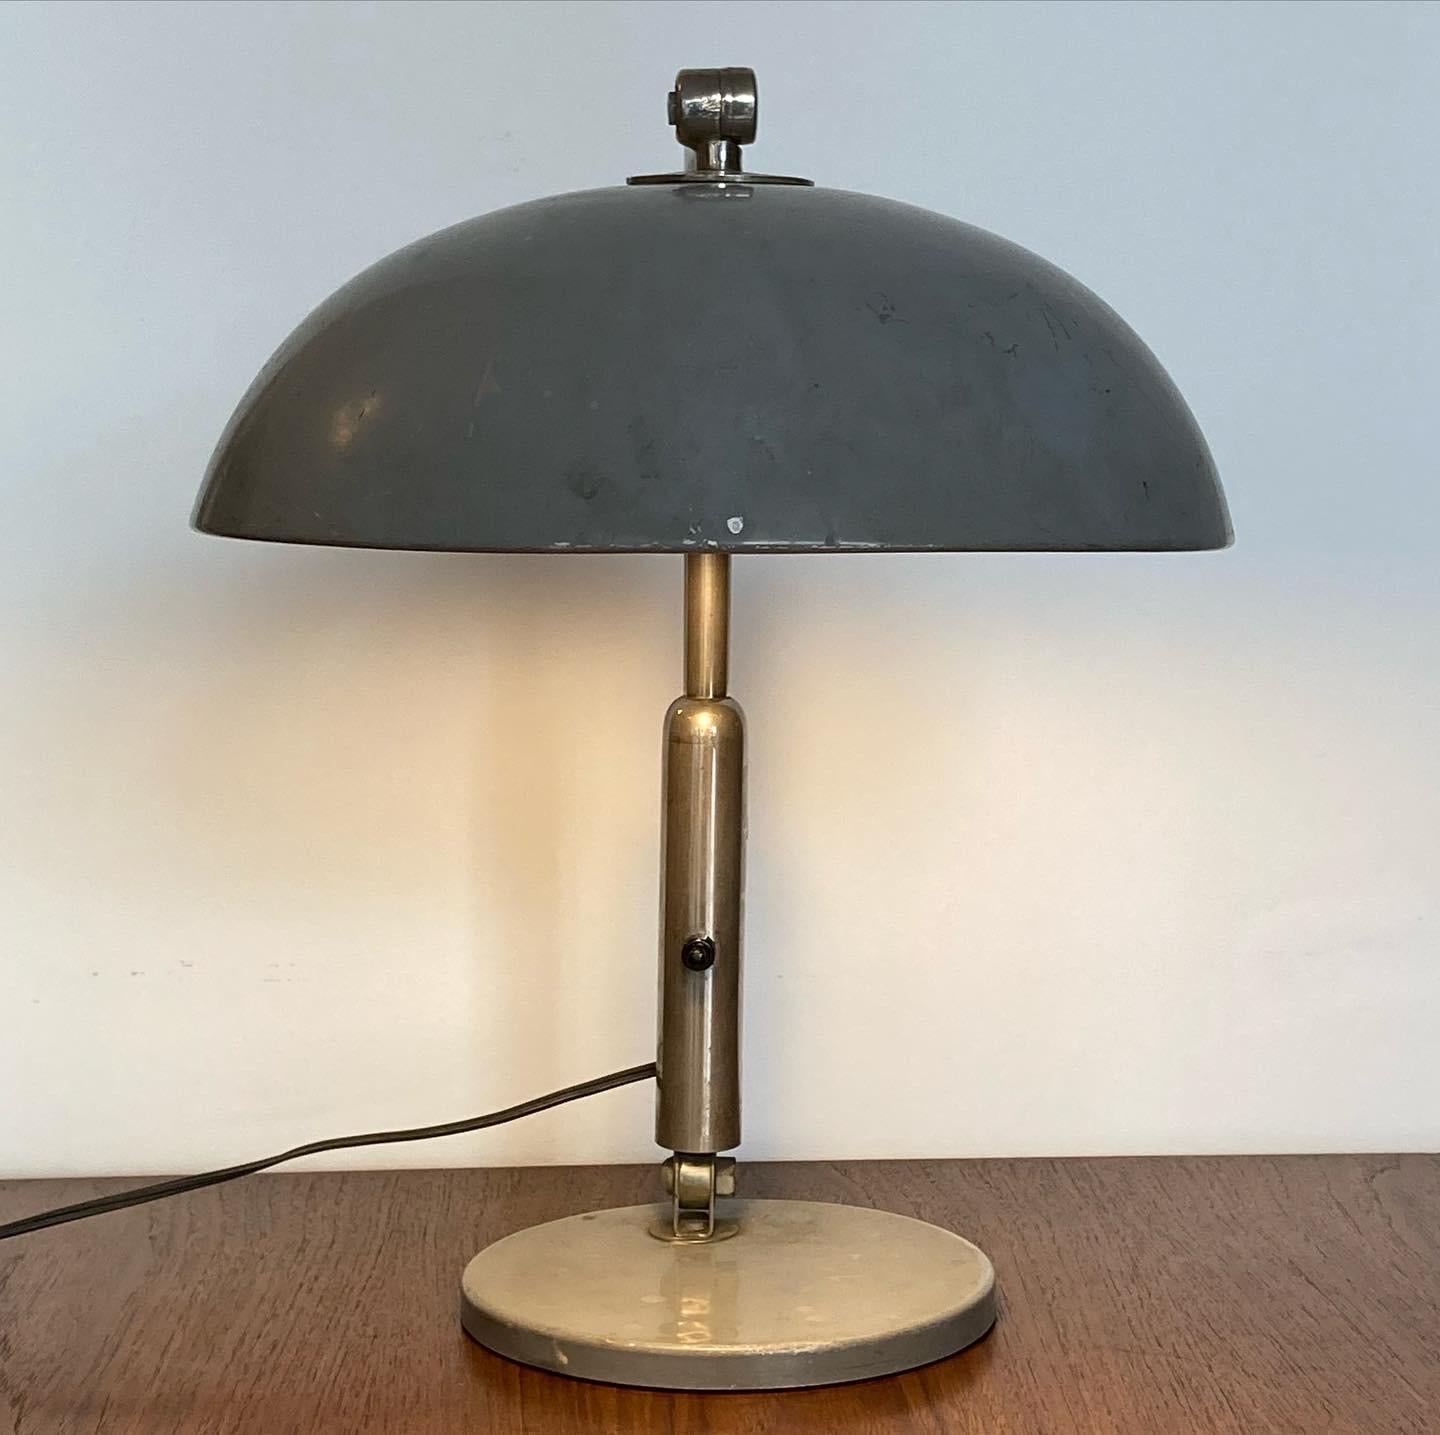 Beautiful desk Lamp designed in 1932 by H. Busquet and manufactured by Hala Zeist in the Netherlands in the 1950s. Strong patina shows how the lamp was loved and used by previous owners, still in great condition with only scratches to the original